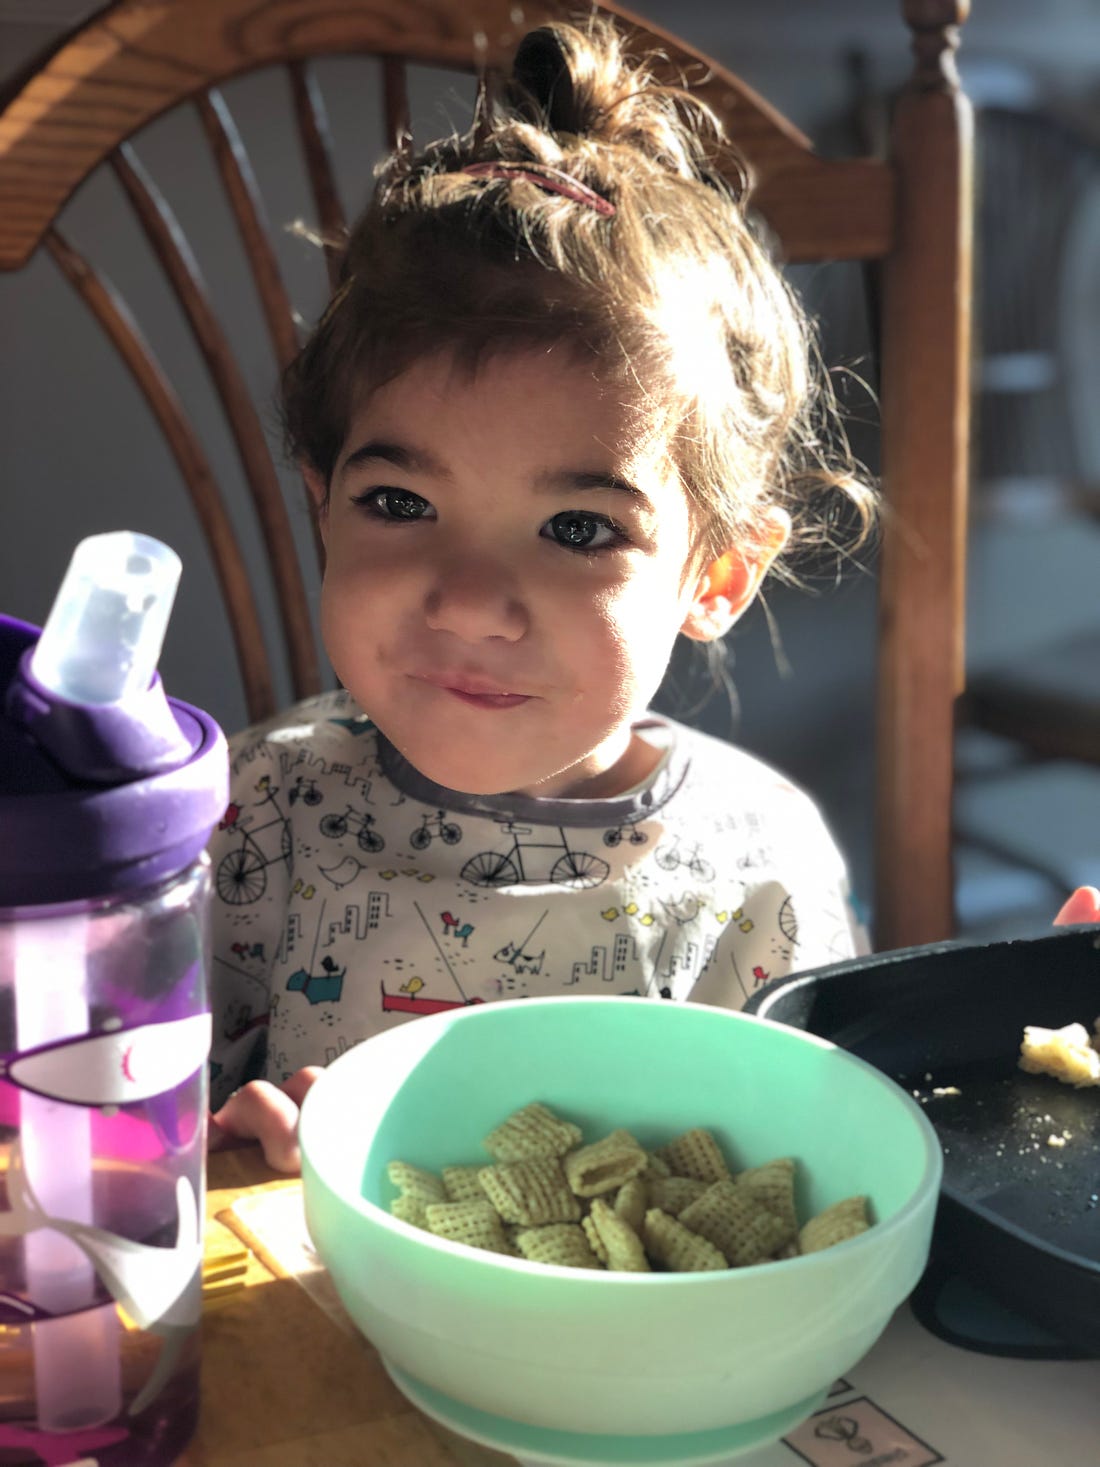 Photograph of a brown haired toddler sitting in a chair with a bowl of cereal in front of her.